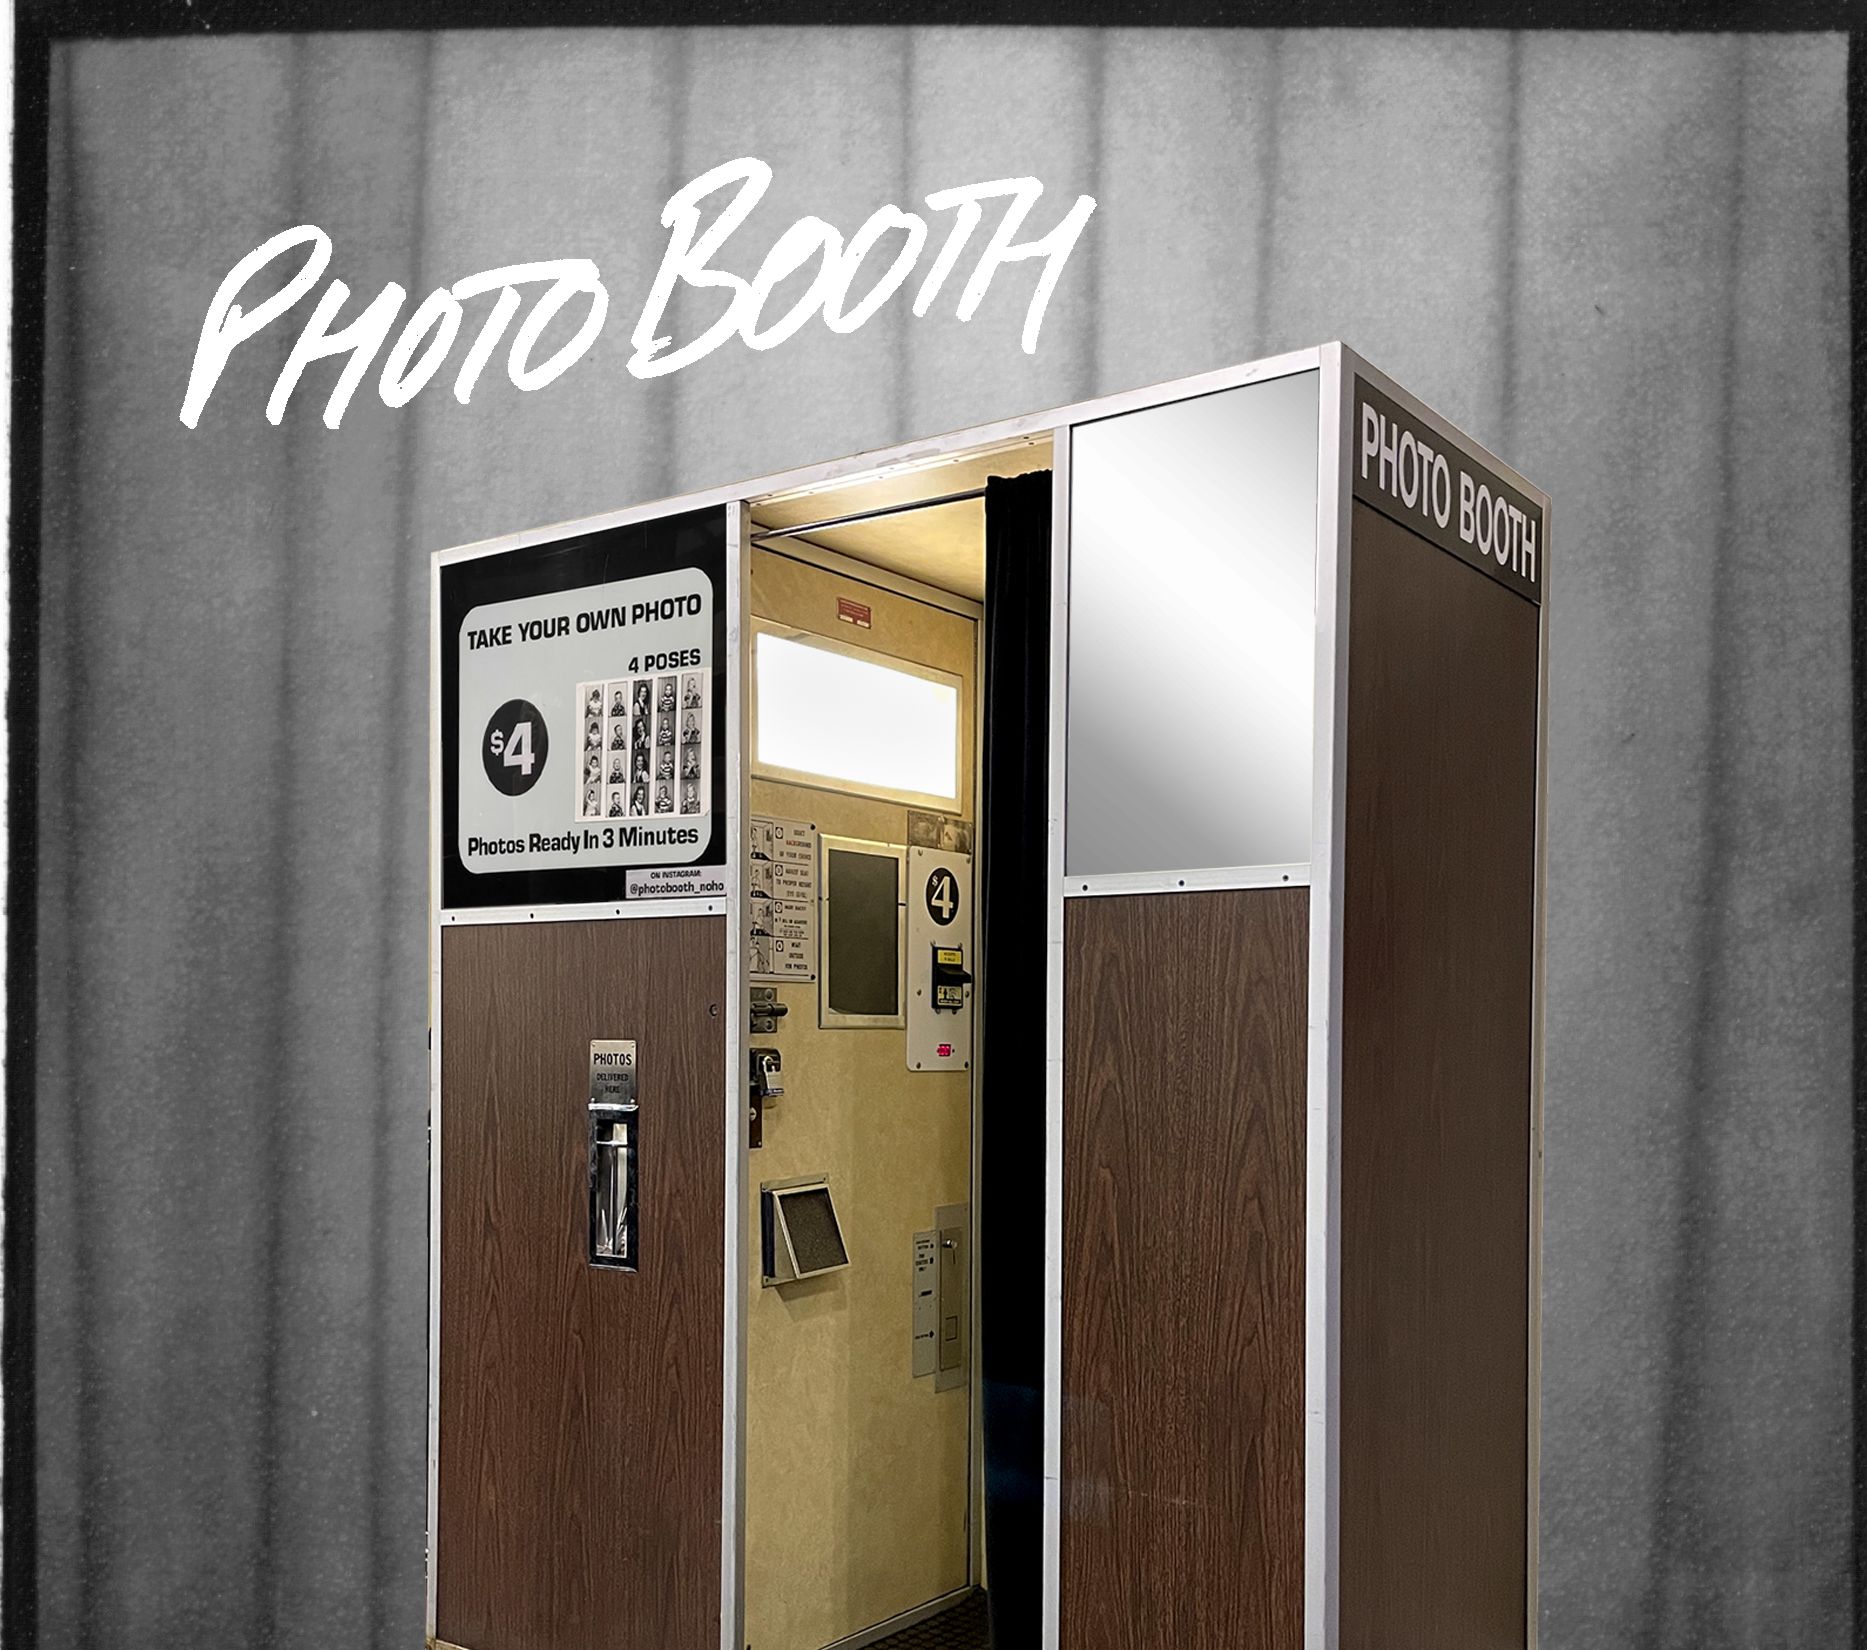 Photobooth Northampton is your go-to spot for taking old school pics!